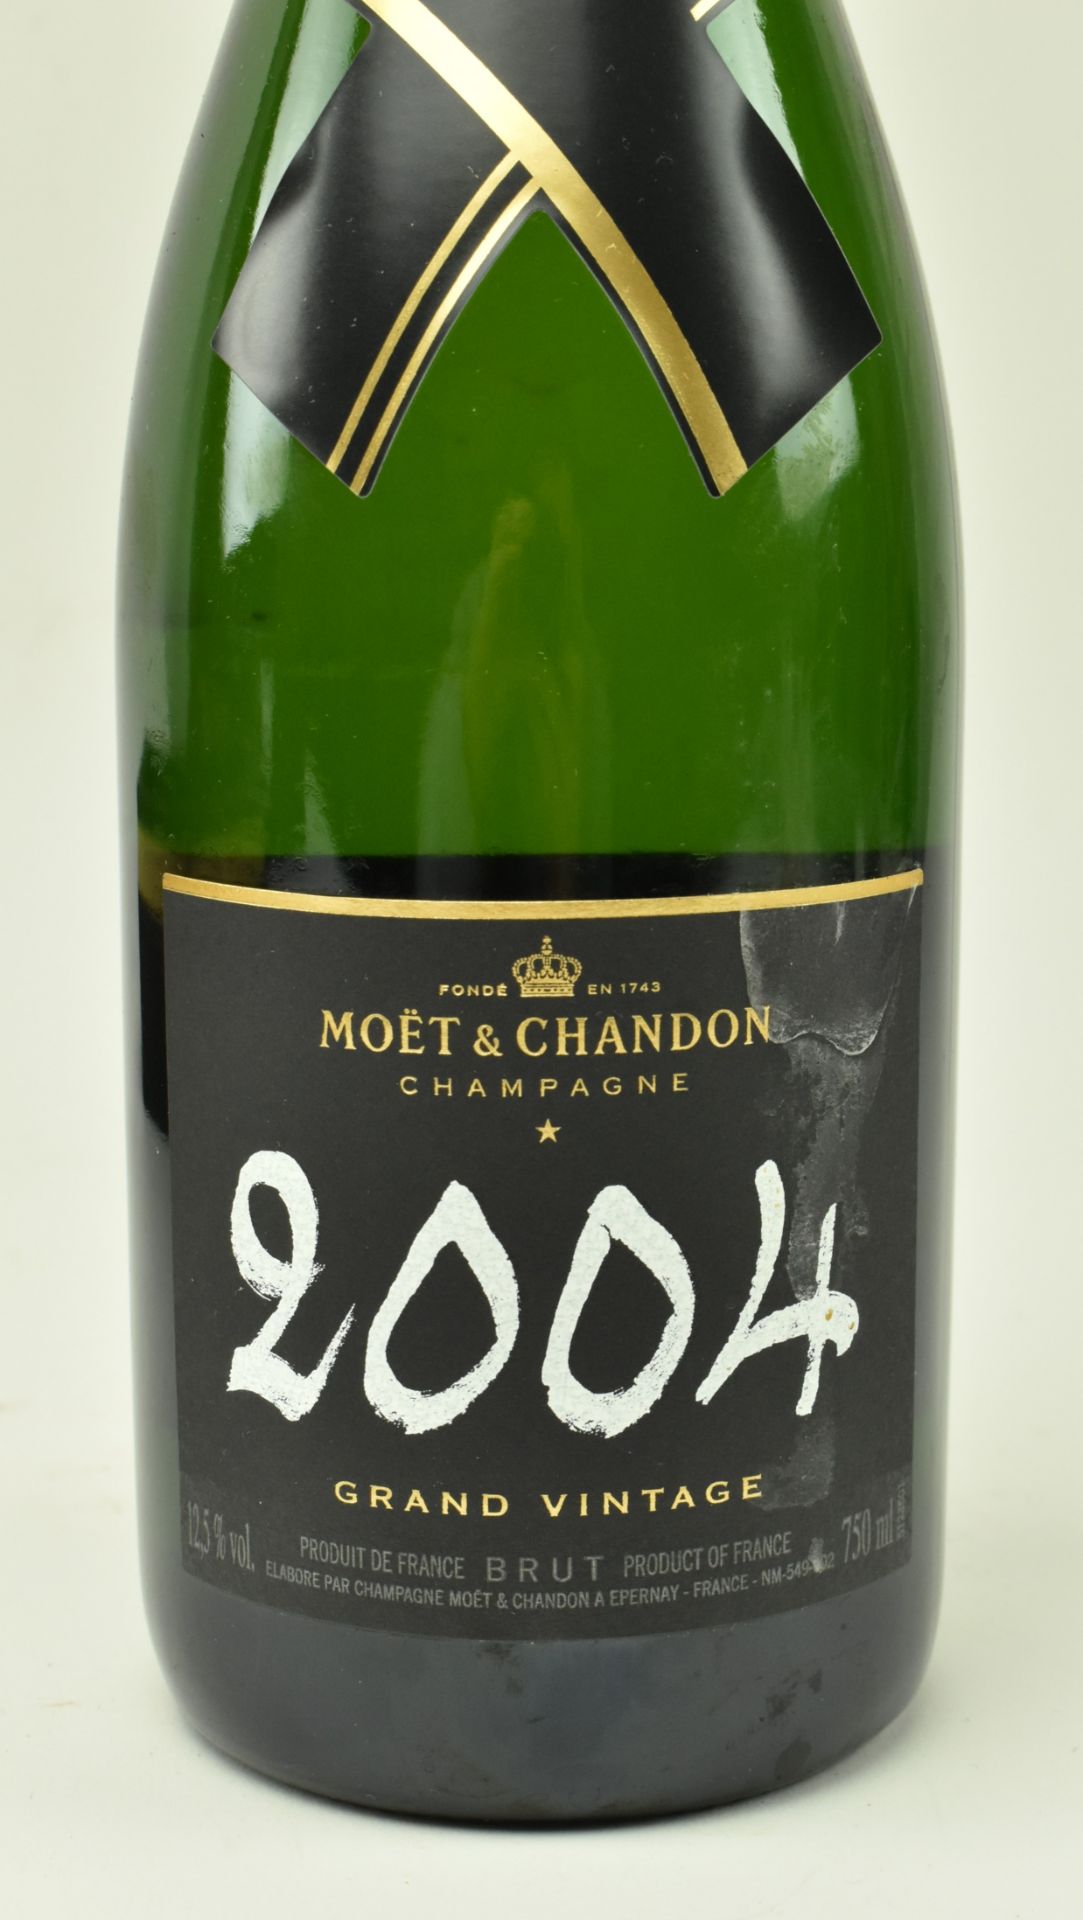 MOET & CHANDON CHAMPAGNE 2004 GRAND VINTAGE, BOXED - Image 5 of 9